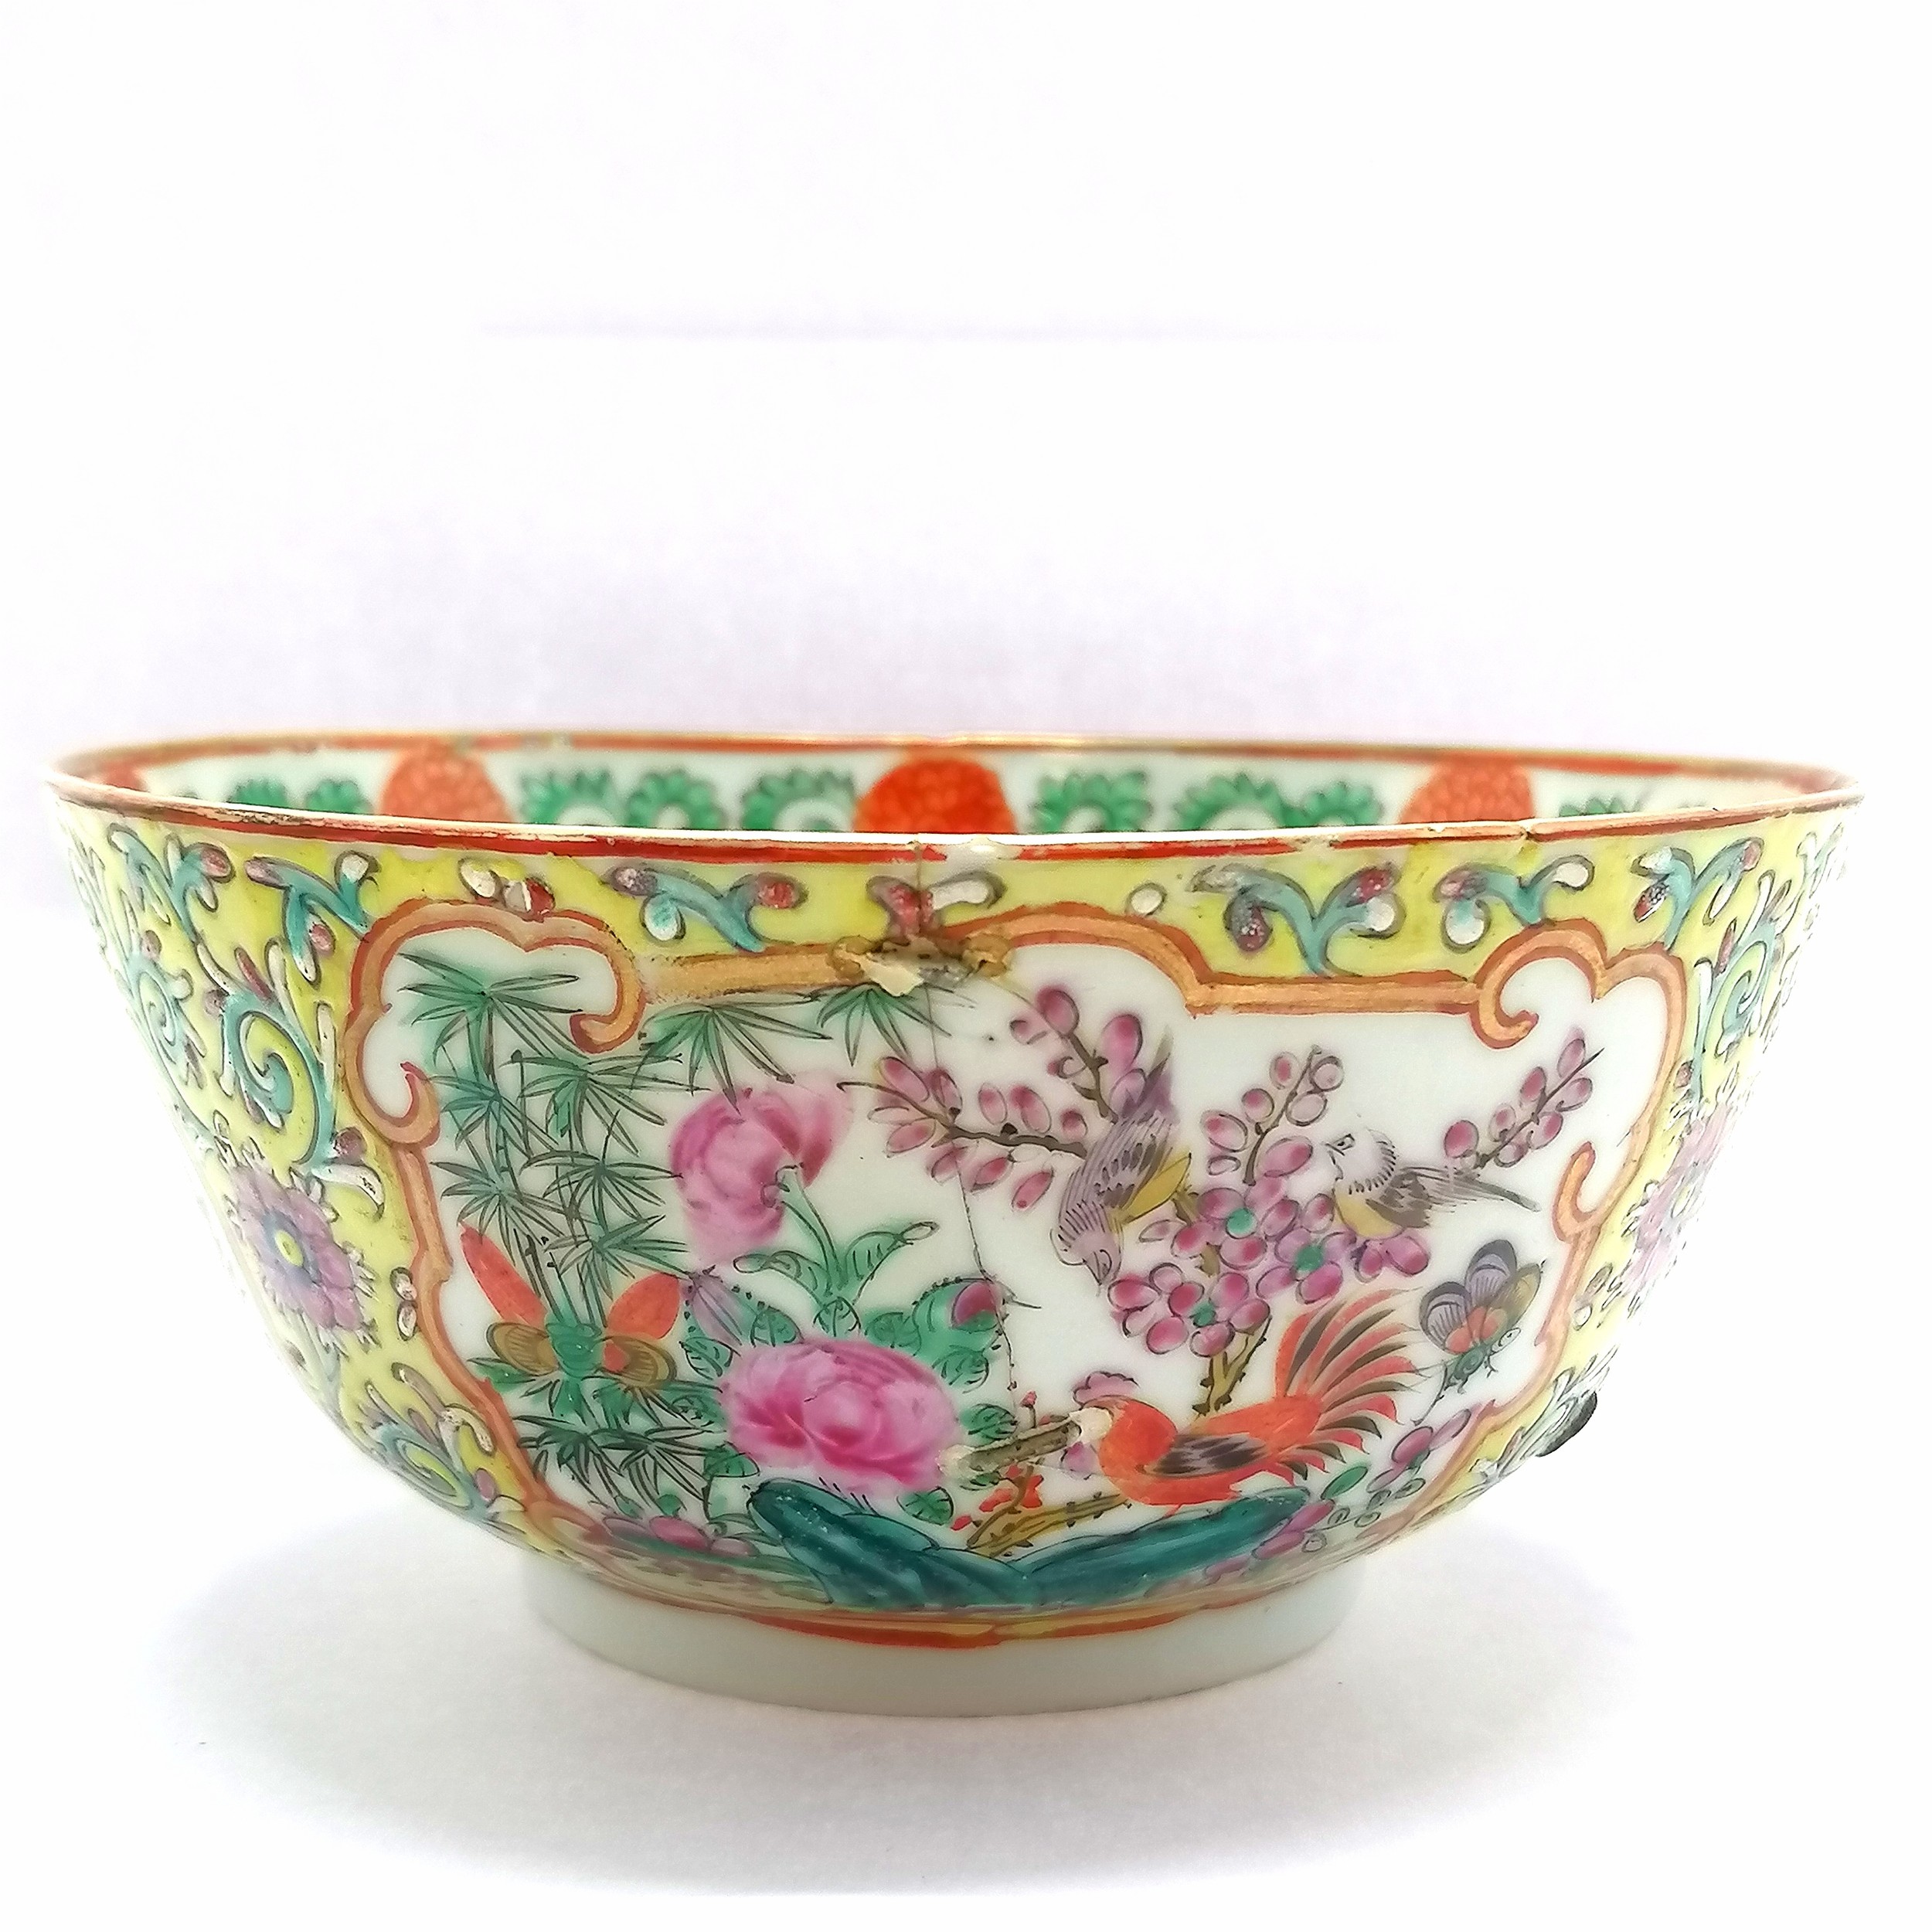 Antique Chinese famille rose bowl - yellow grounded with profuse floral & butterfly & bird (inc - Image 7 of 10